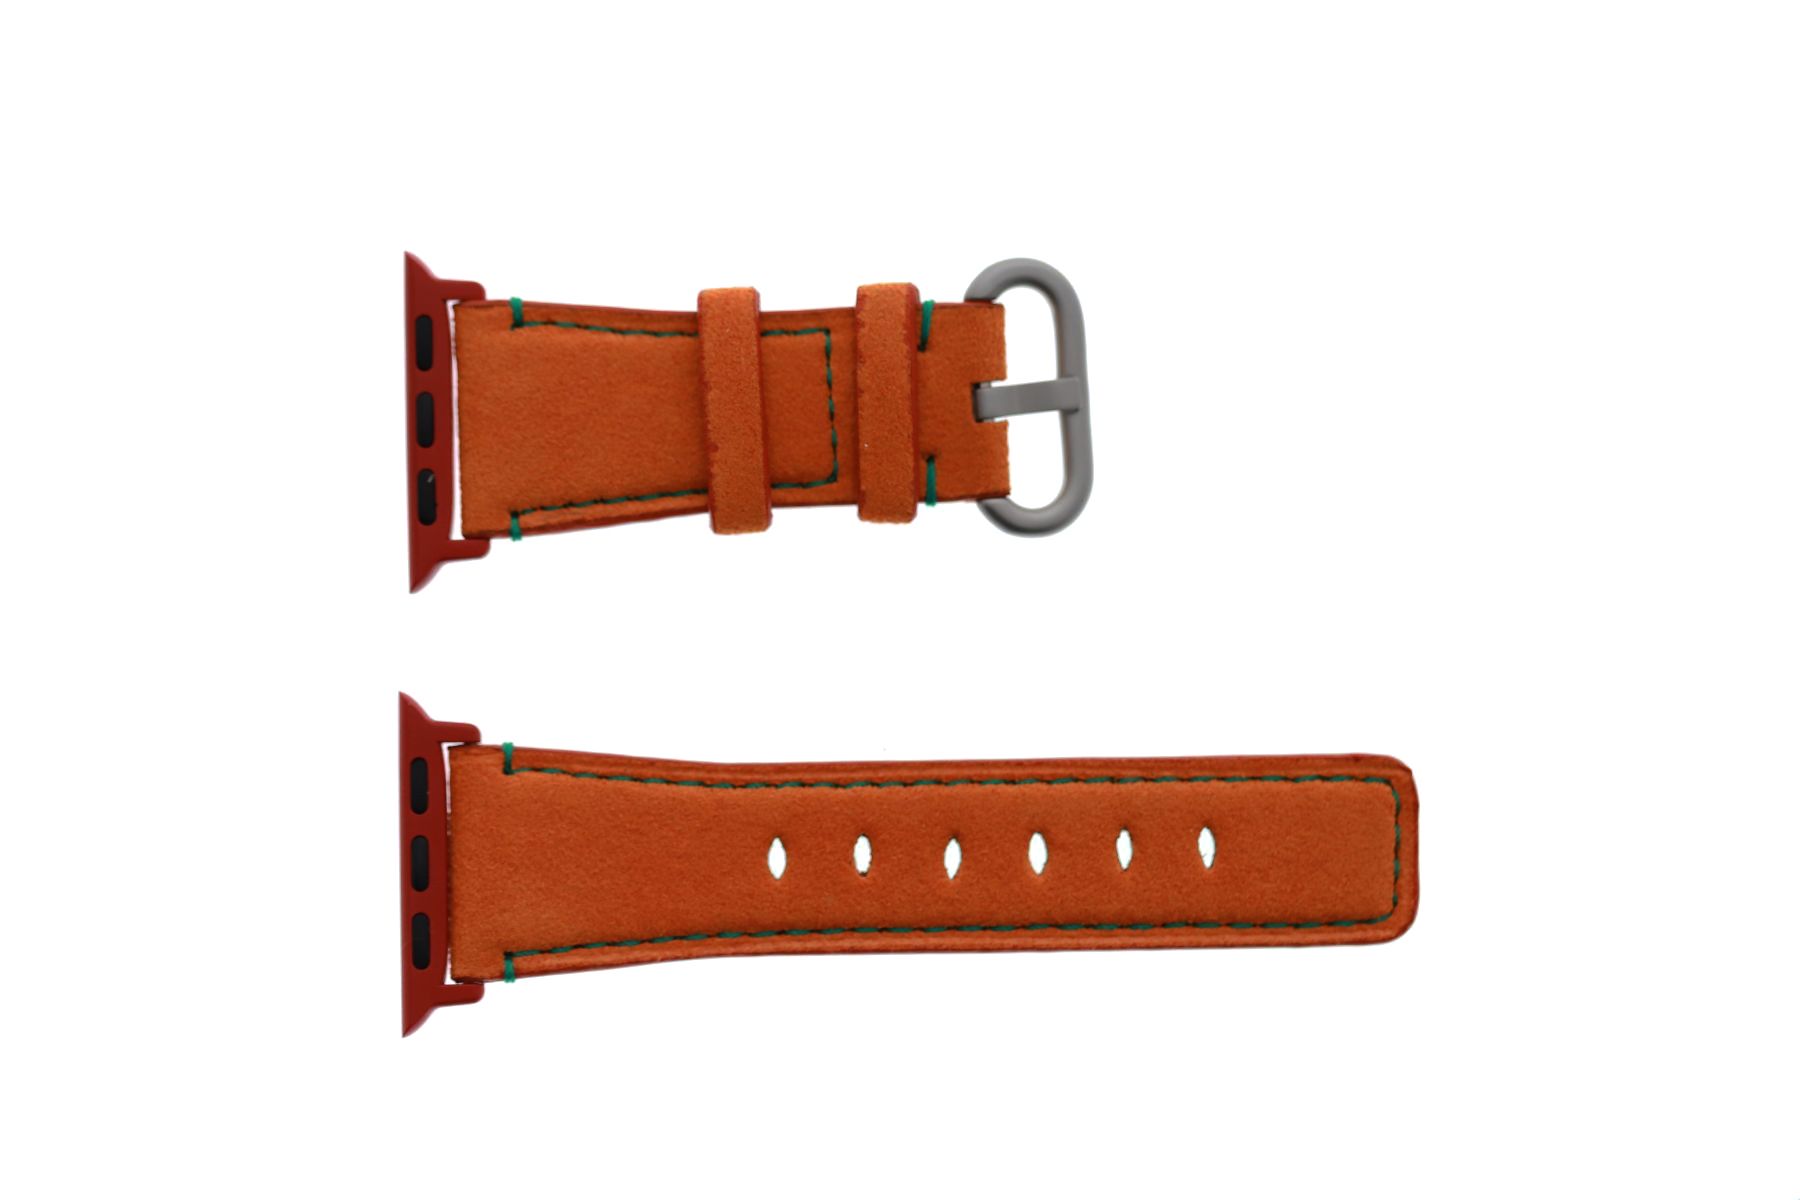 Band for Tiny Wrist (for All Apple Watch sizes) in ORANGE Alcantara